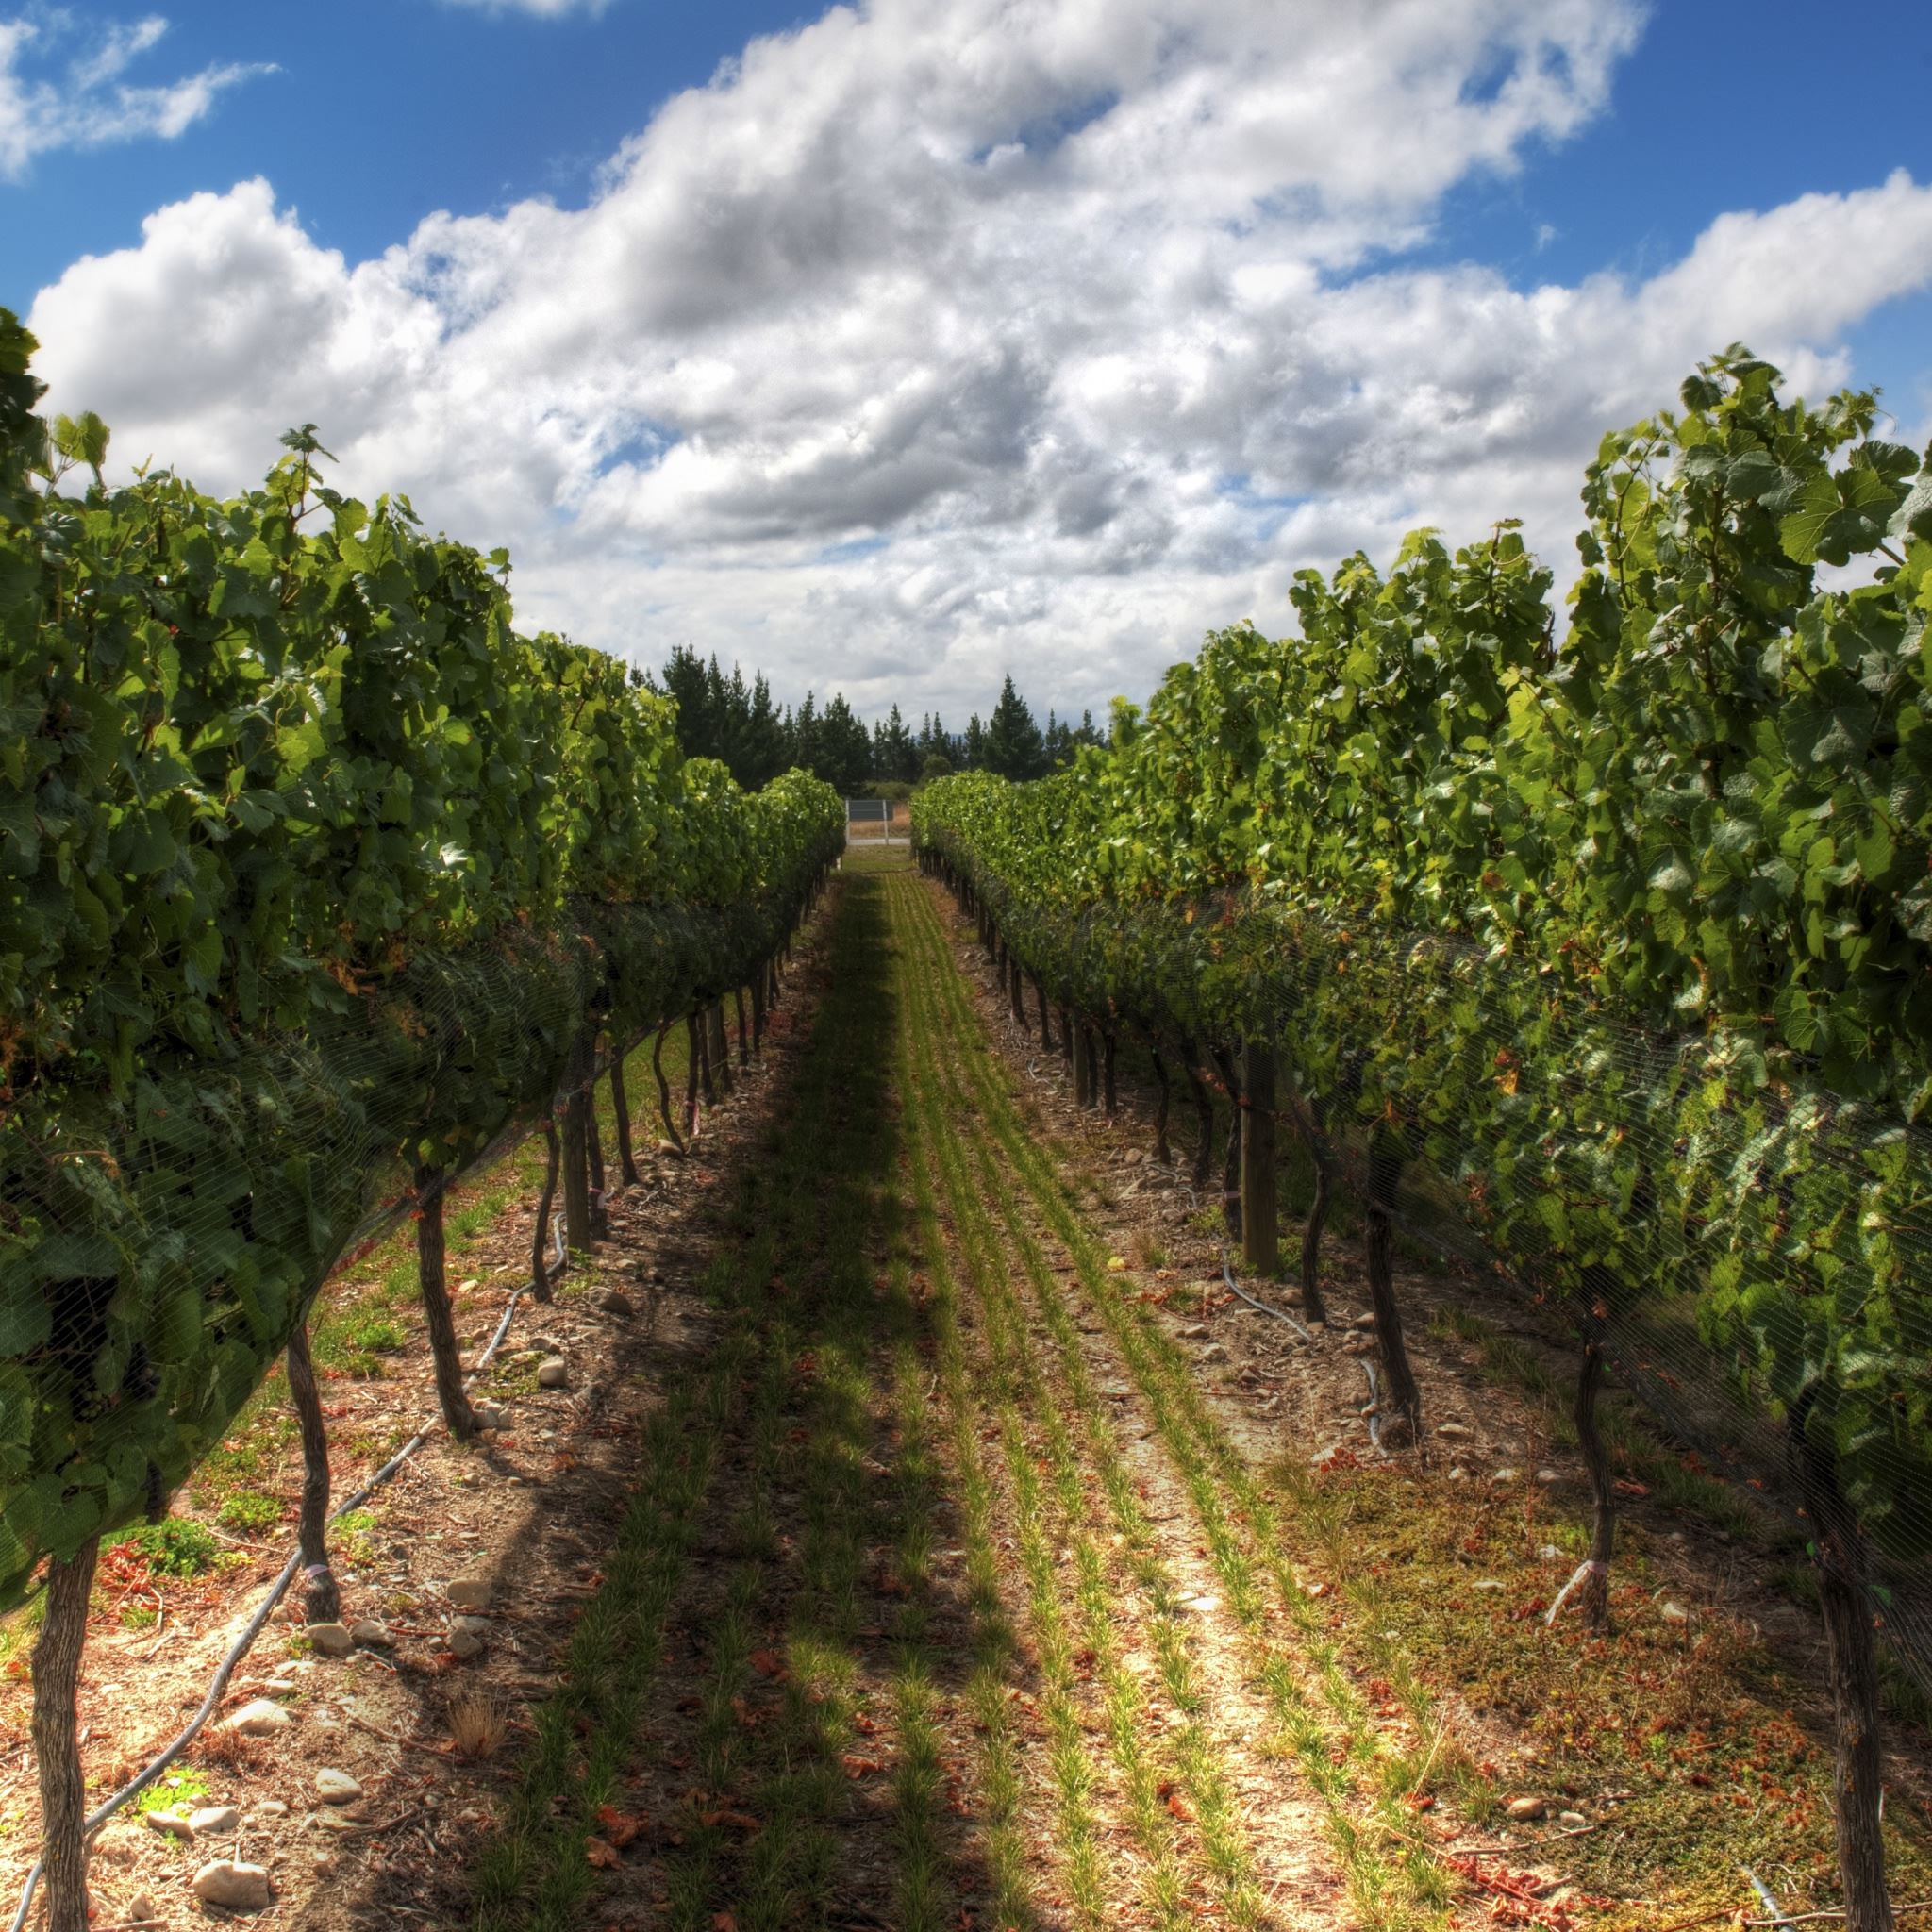 The Wines Of New Zealand iPad Air wallpaper 